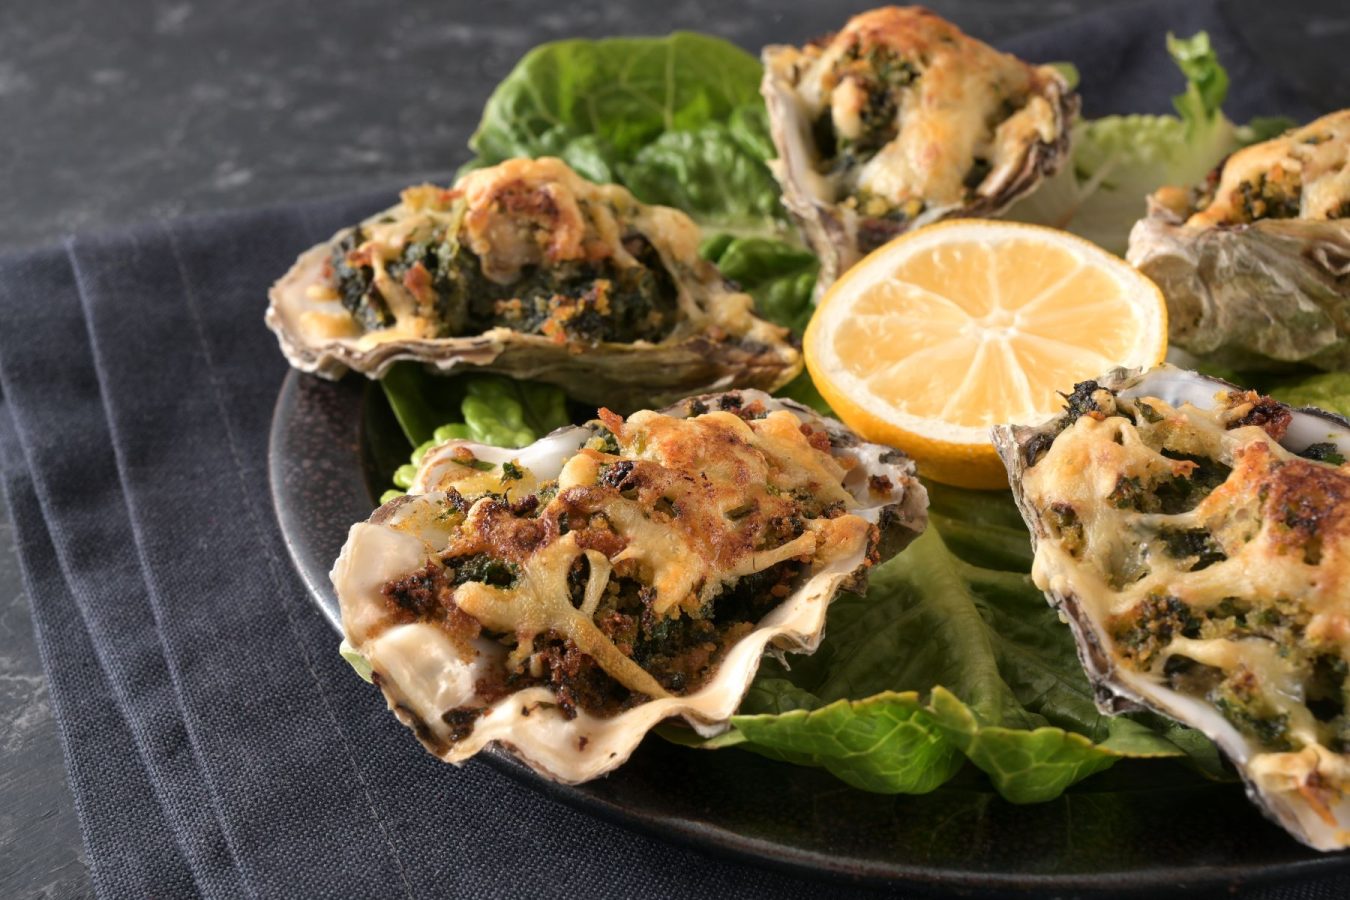 Oysters Rockefeller dish